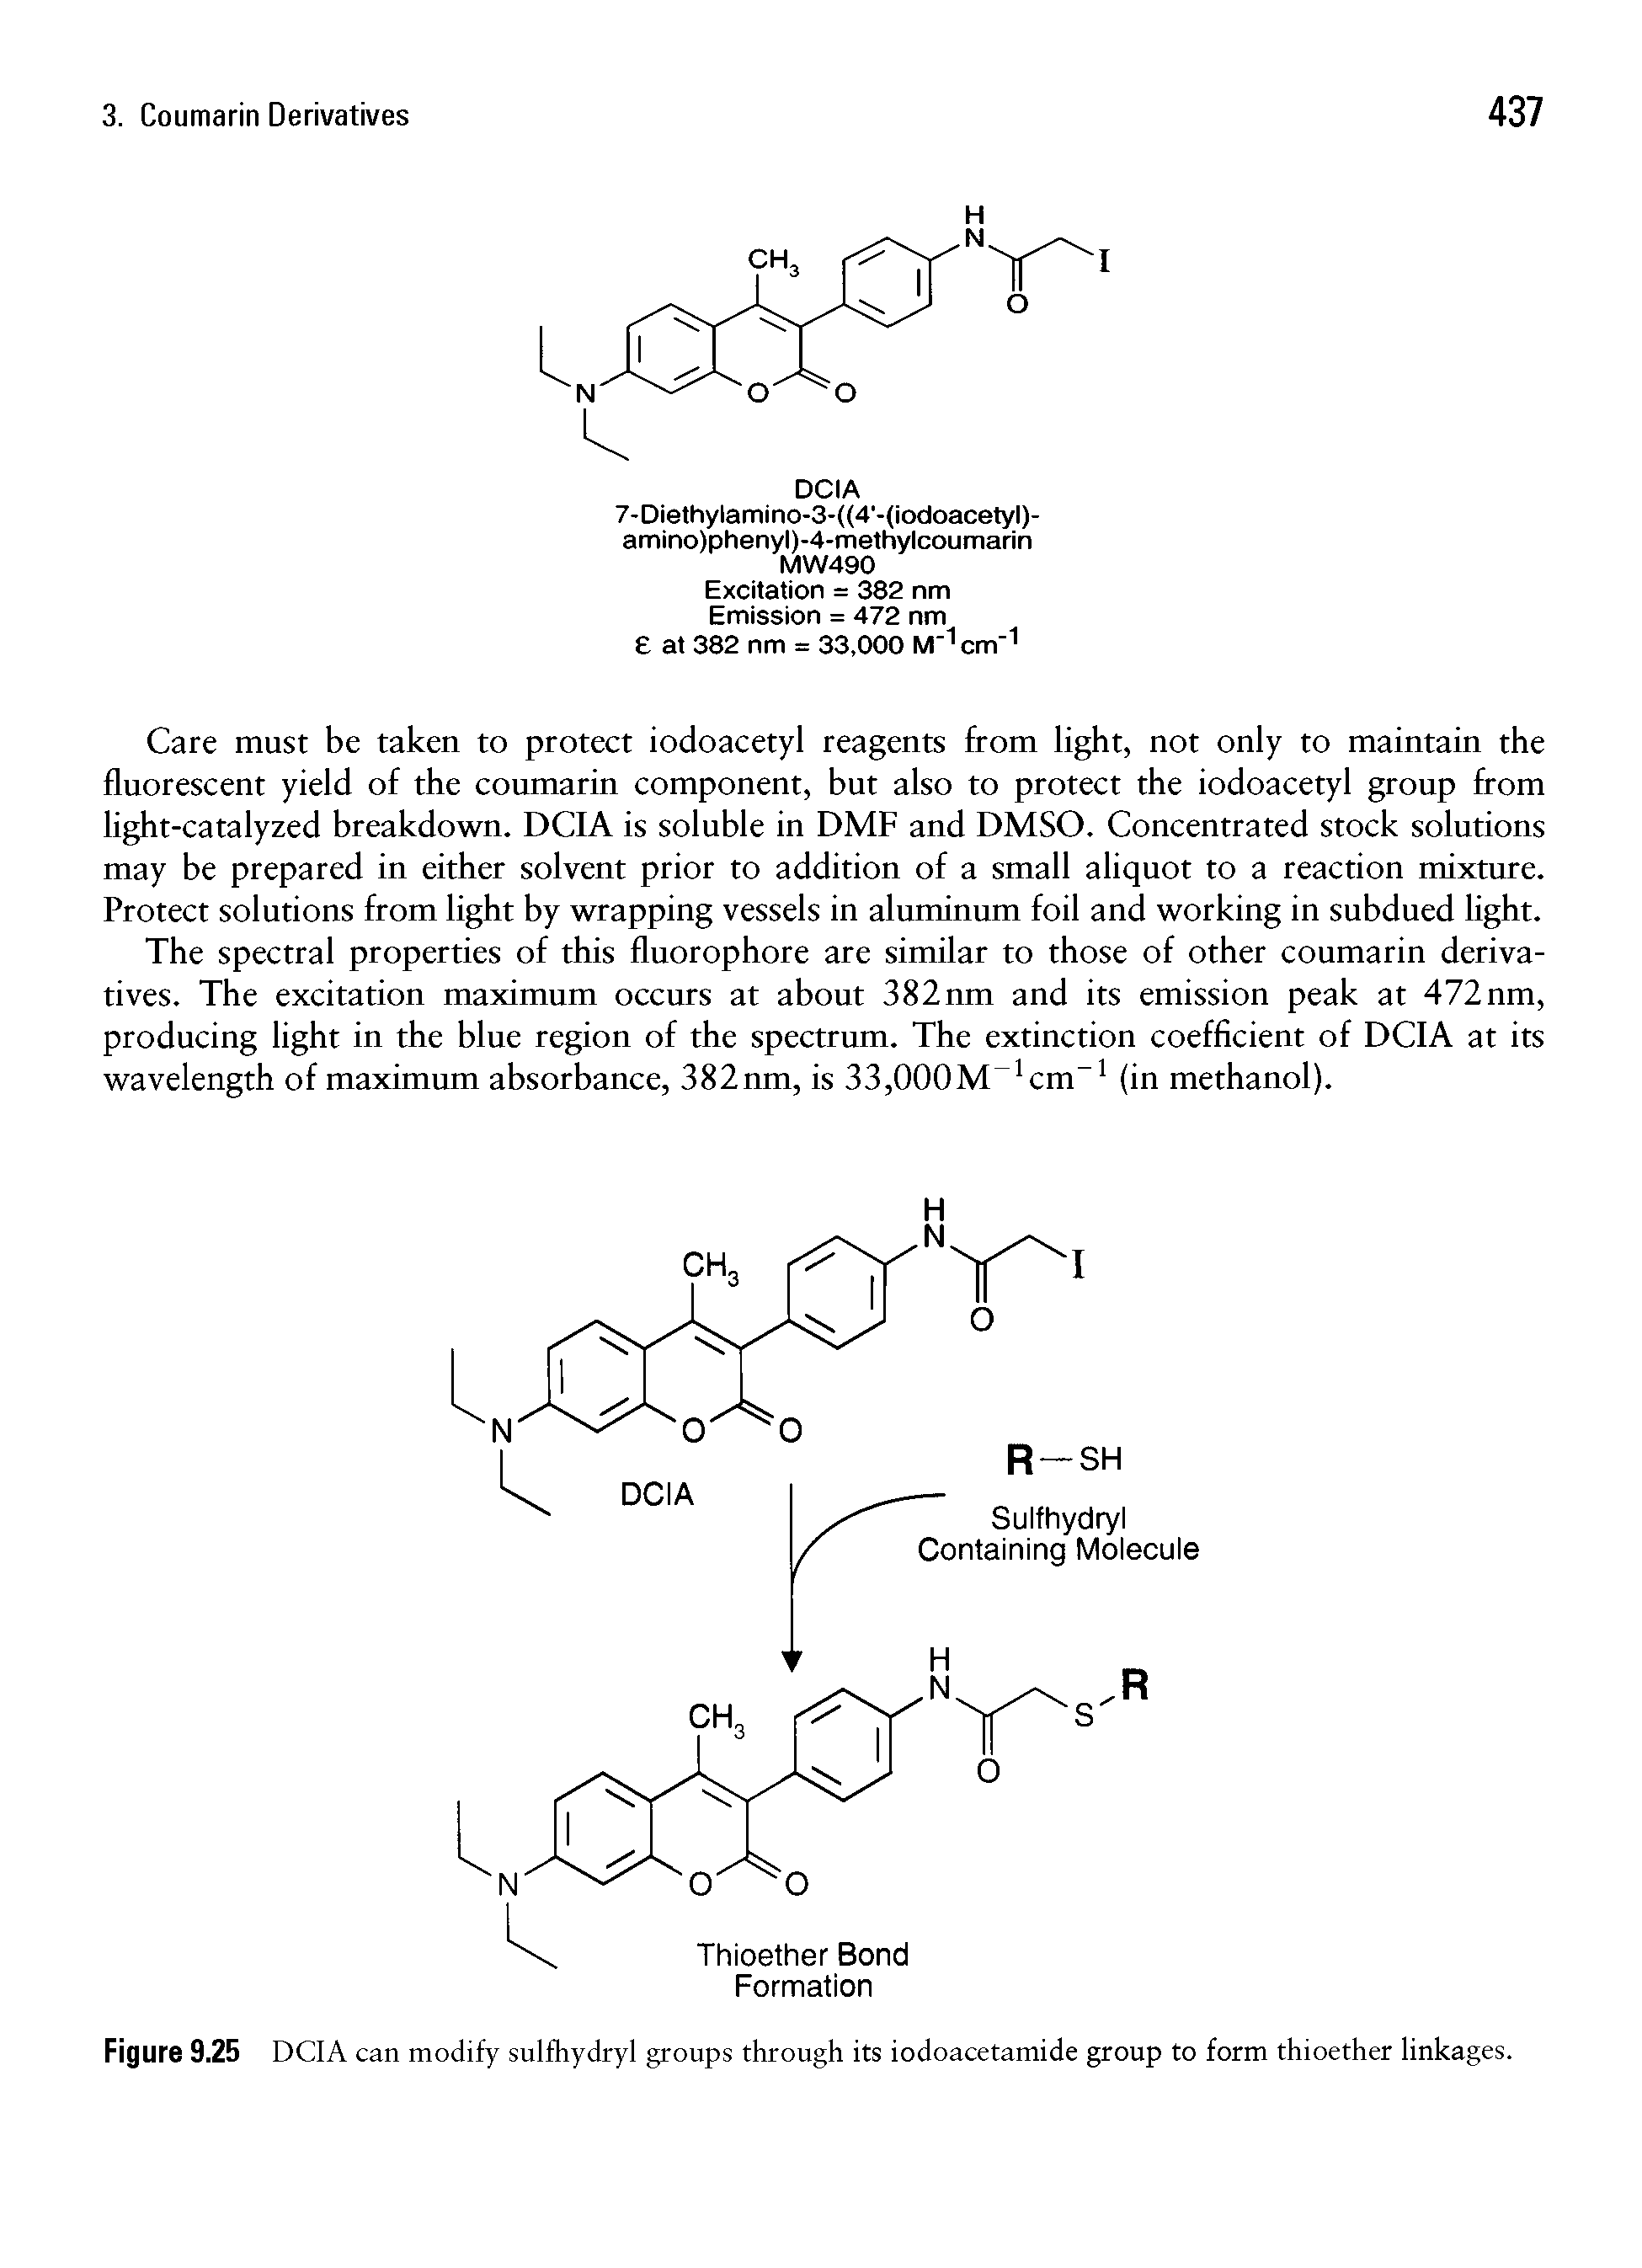 Figure 9.25 DCIA can modify sulfhydryl groups through its iodoacetamide group to form thioether linkages.